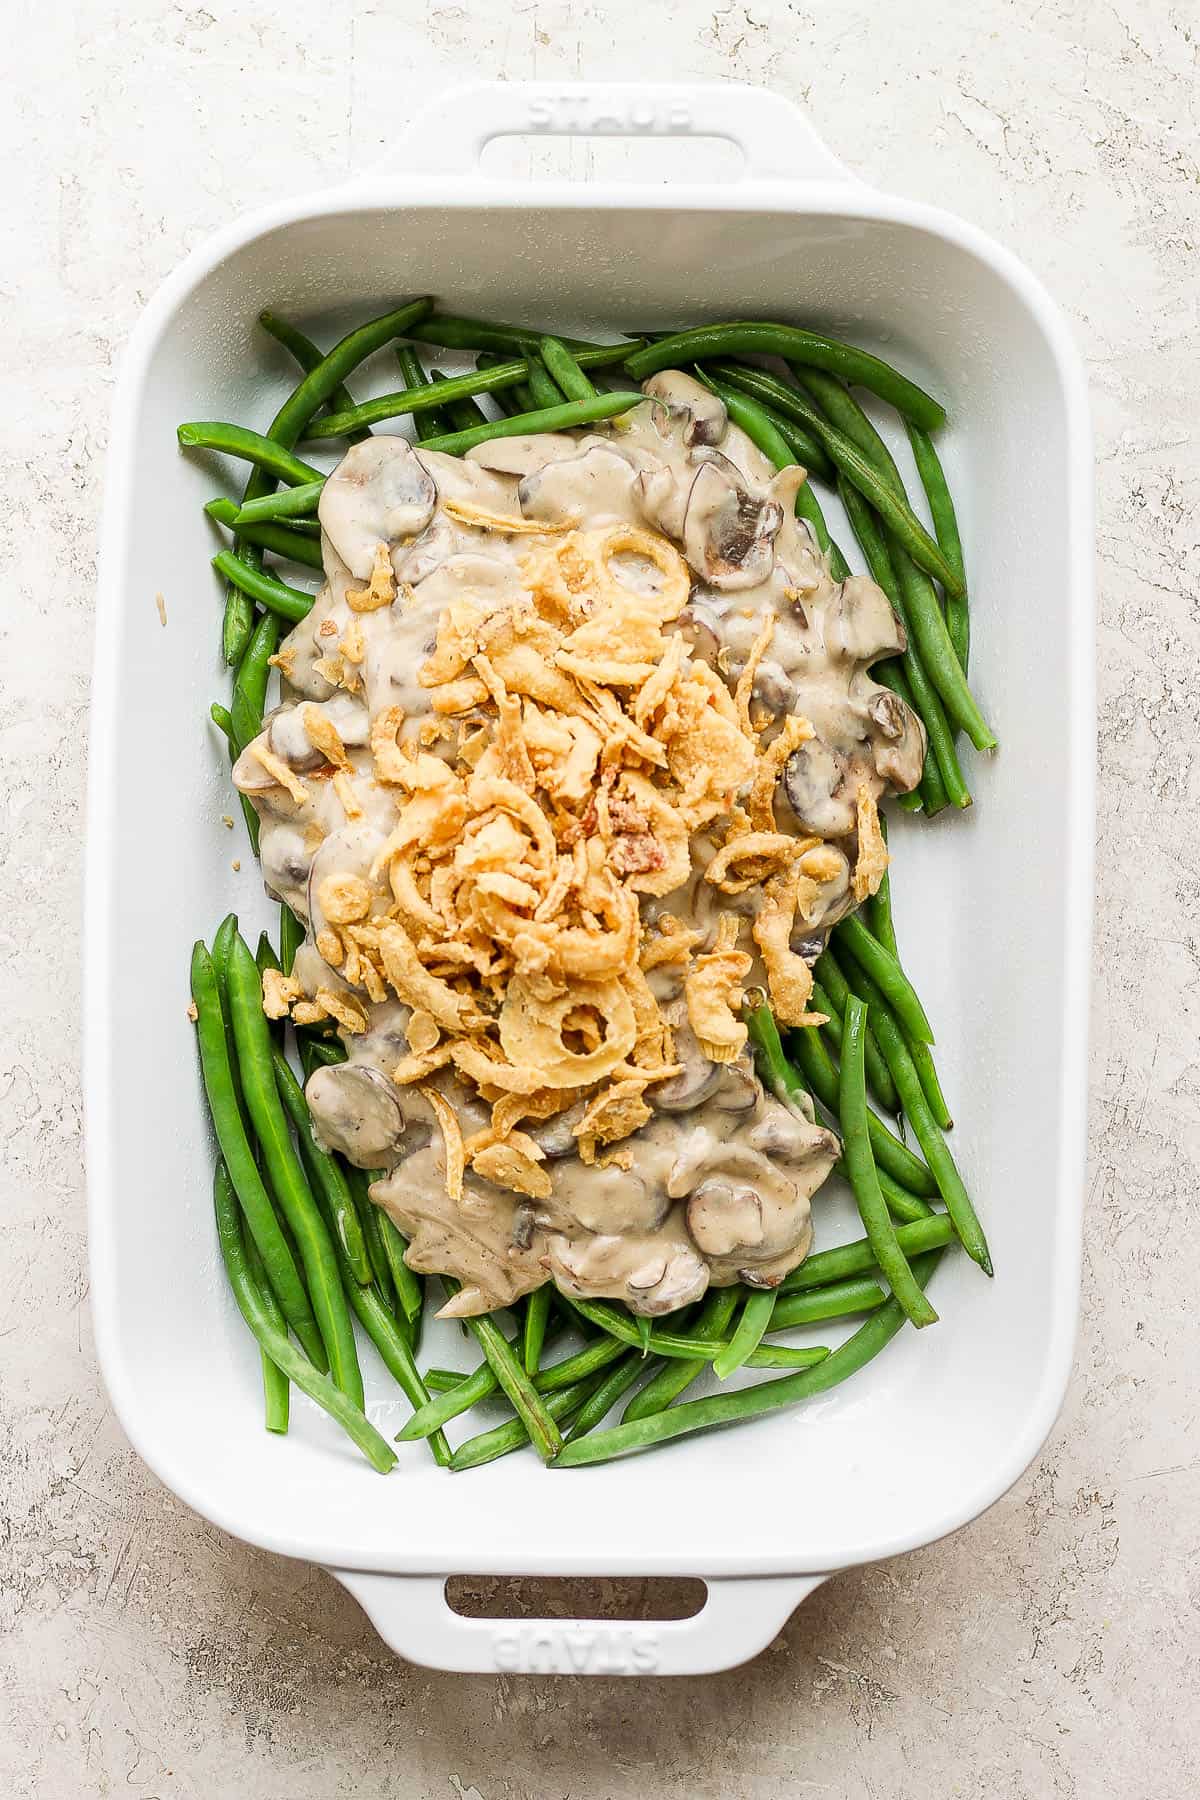 The mushroom sauce added to the baking dish with the green beans and 3/4 cup of the french onions also added.